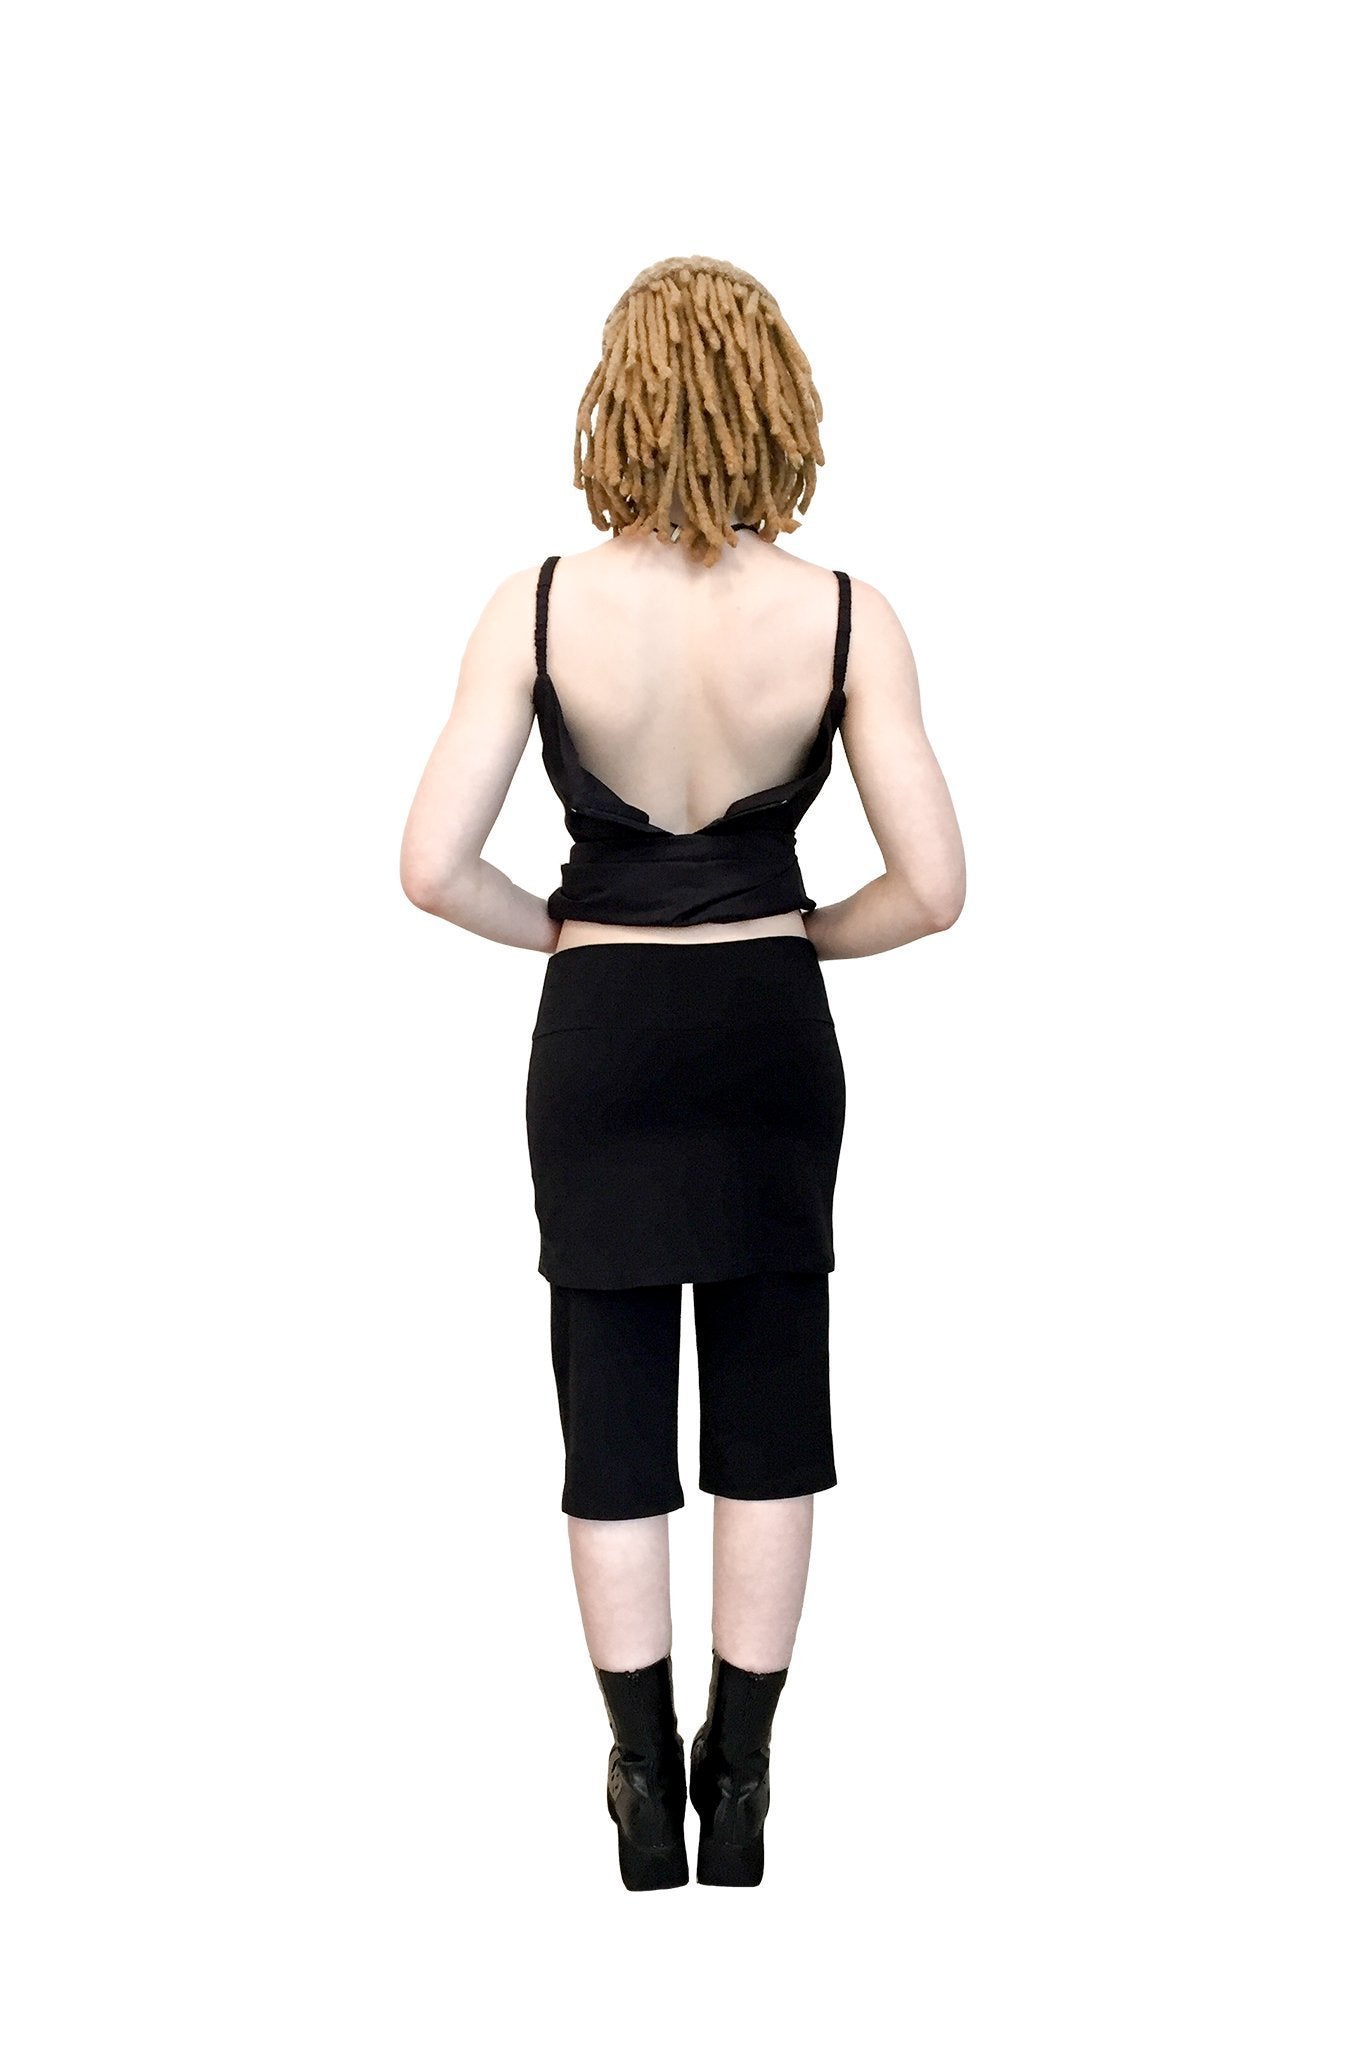 Double Trouble I ORGANIC Cotton Lycra Short with Skirt